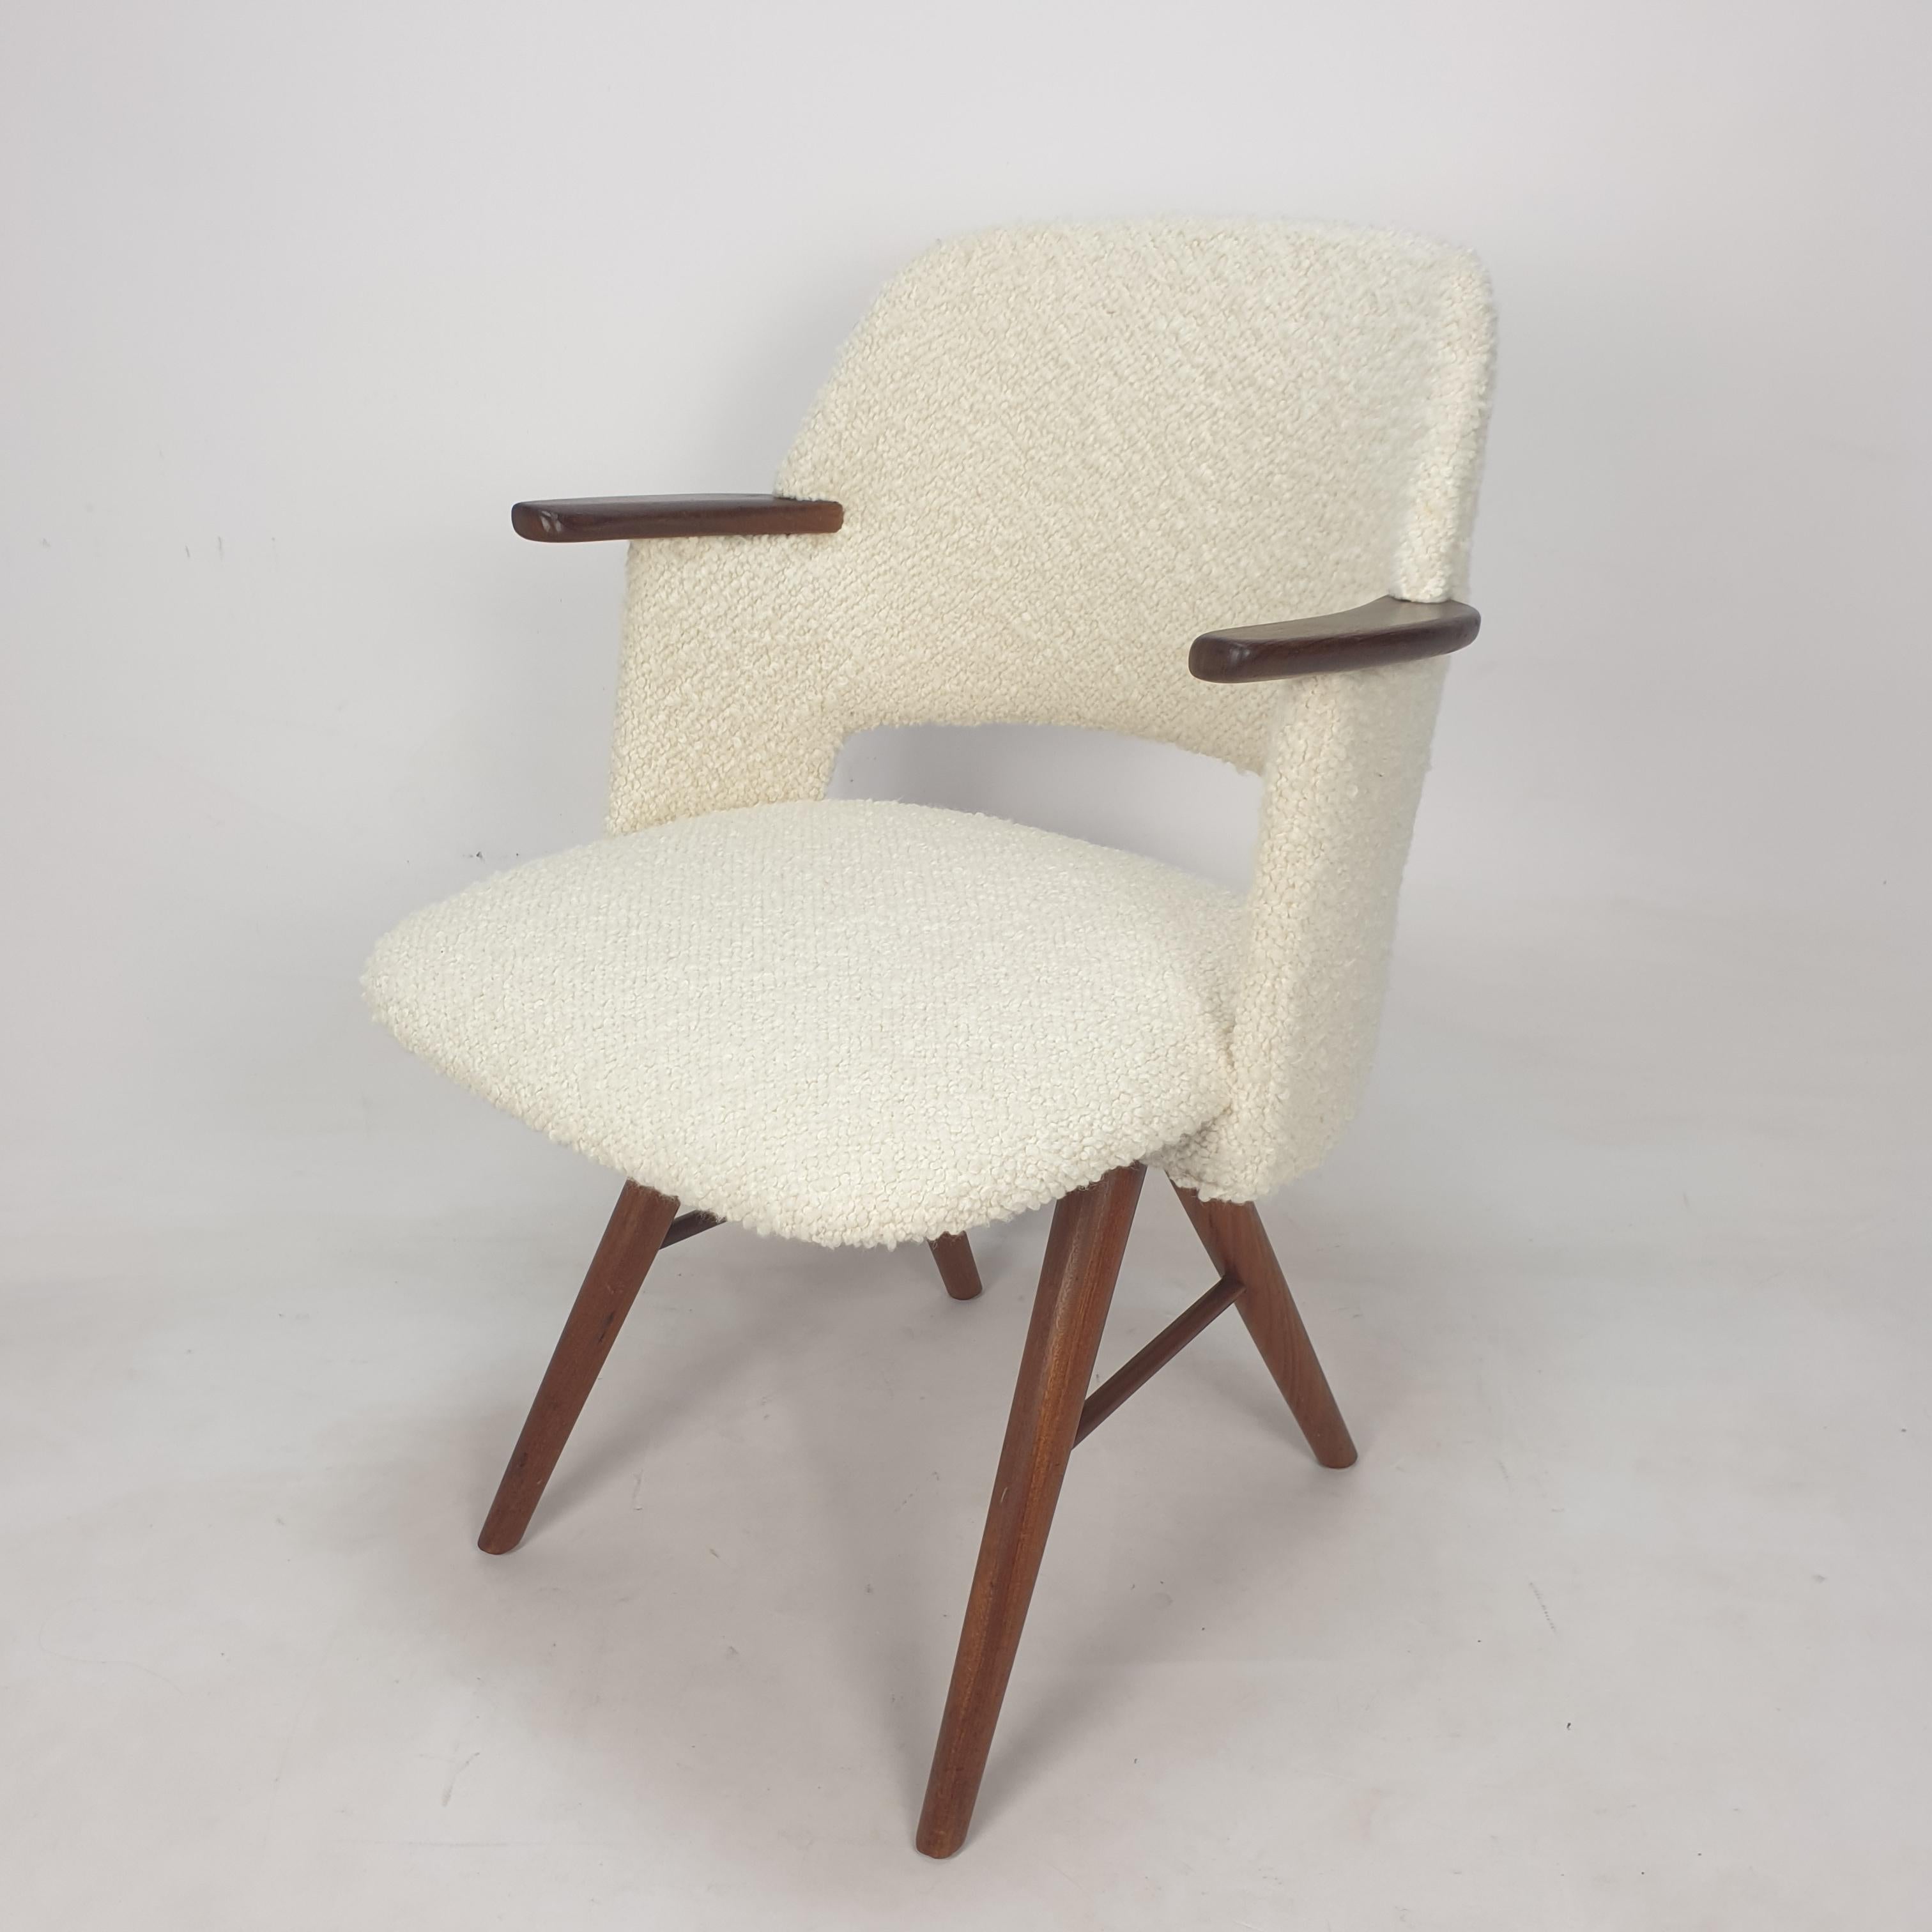 This very comfortable mid-century side chair, model FT30, is designed by Cees Braakman.
It is manufactured during the 50's by UMS Pastoe in the Netherlands. 

The legs and the armrests are made from oak.
The seat is just reupholstered with new